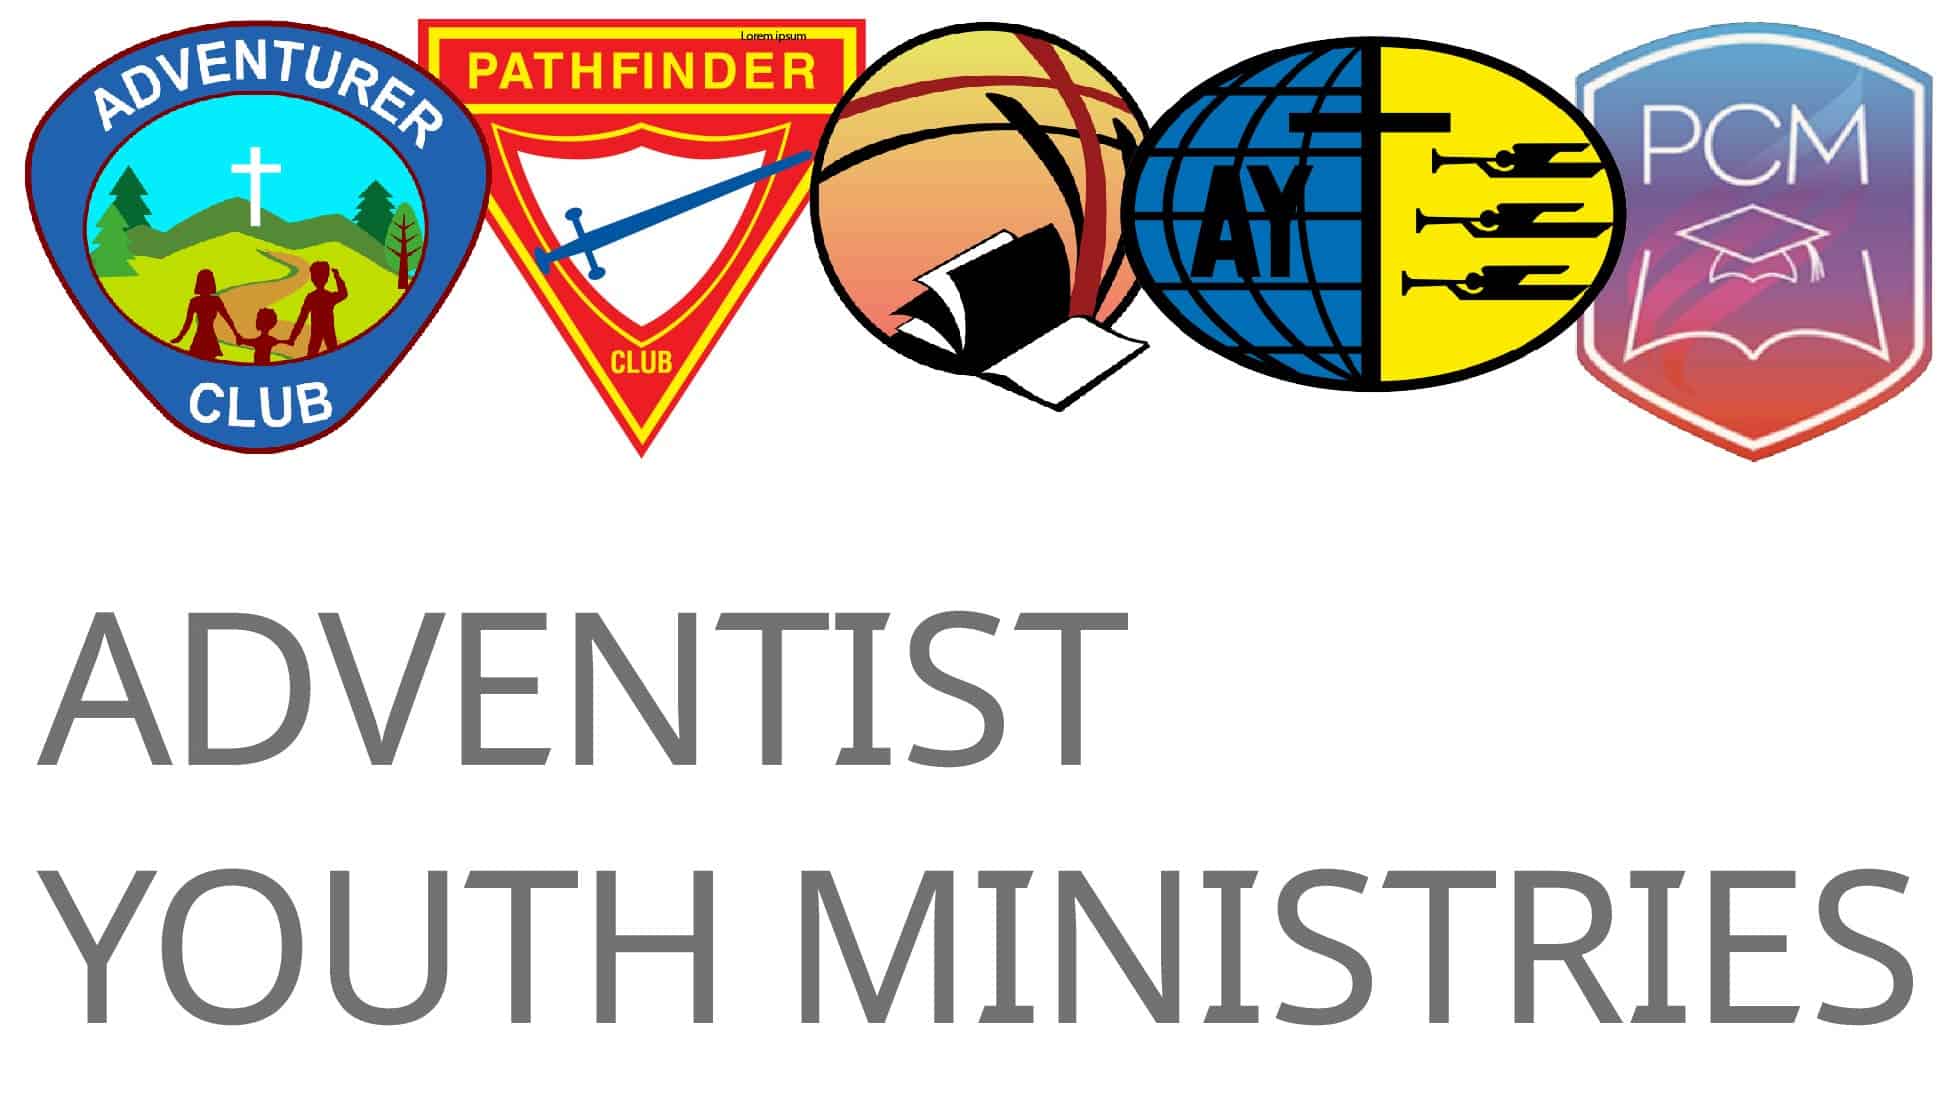 Youth Ministry Logos And Names